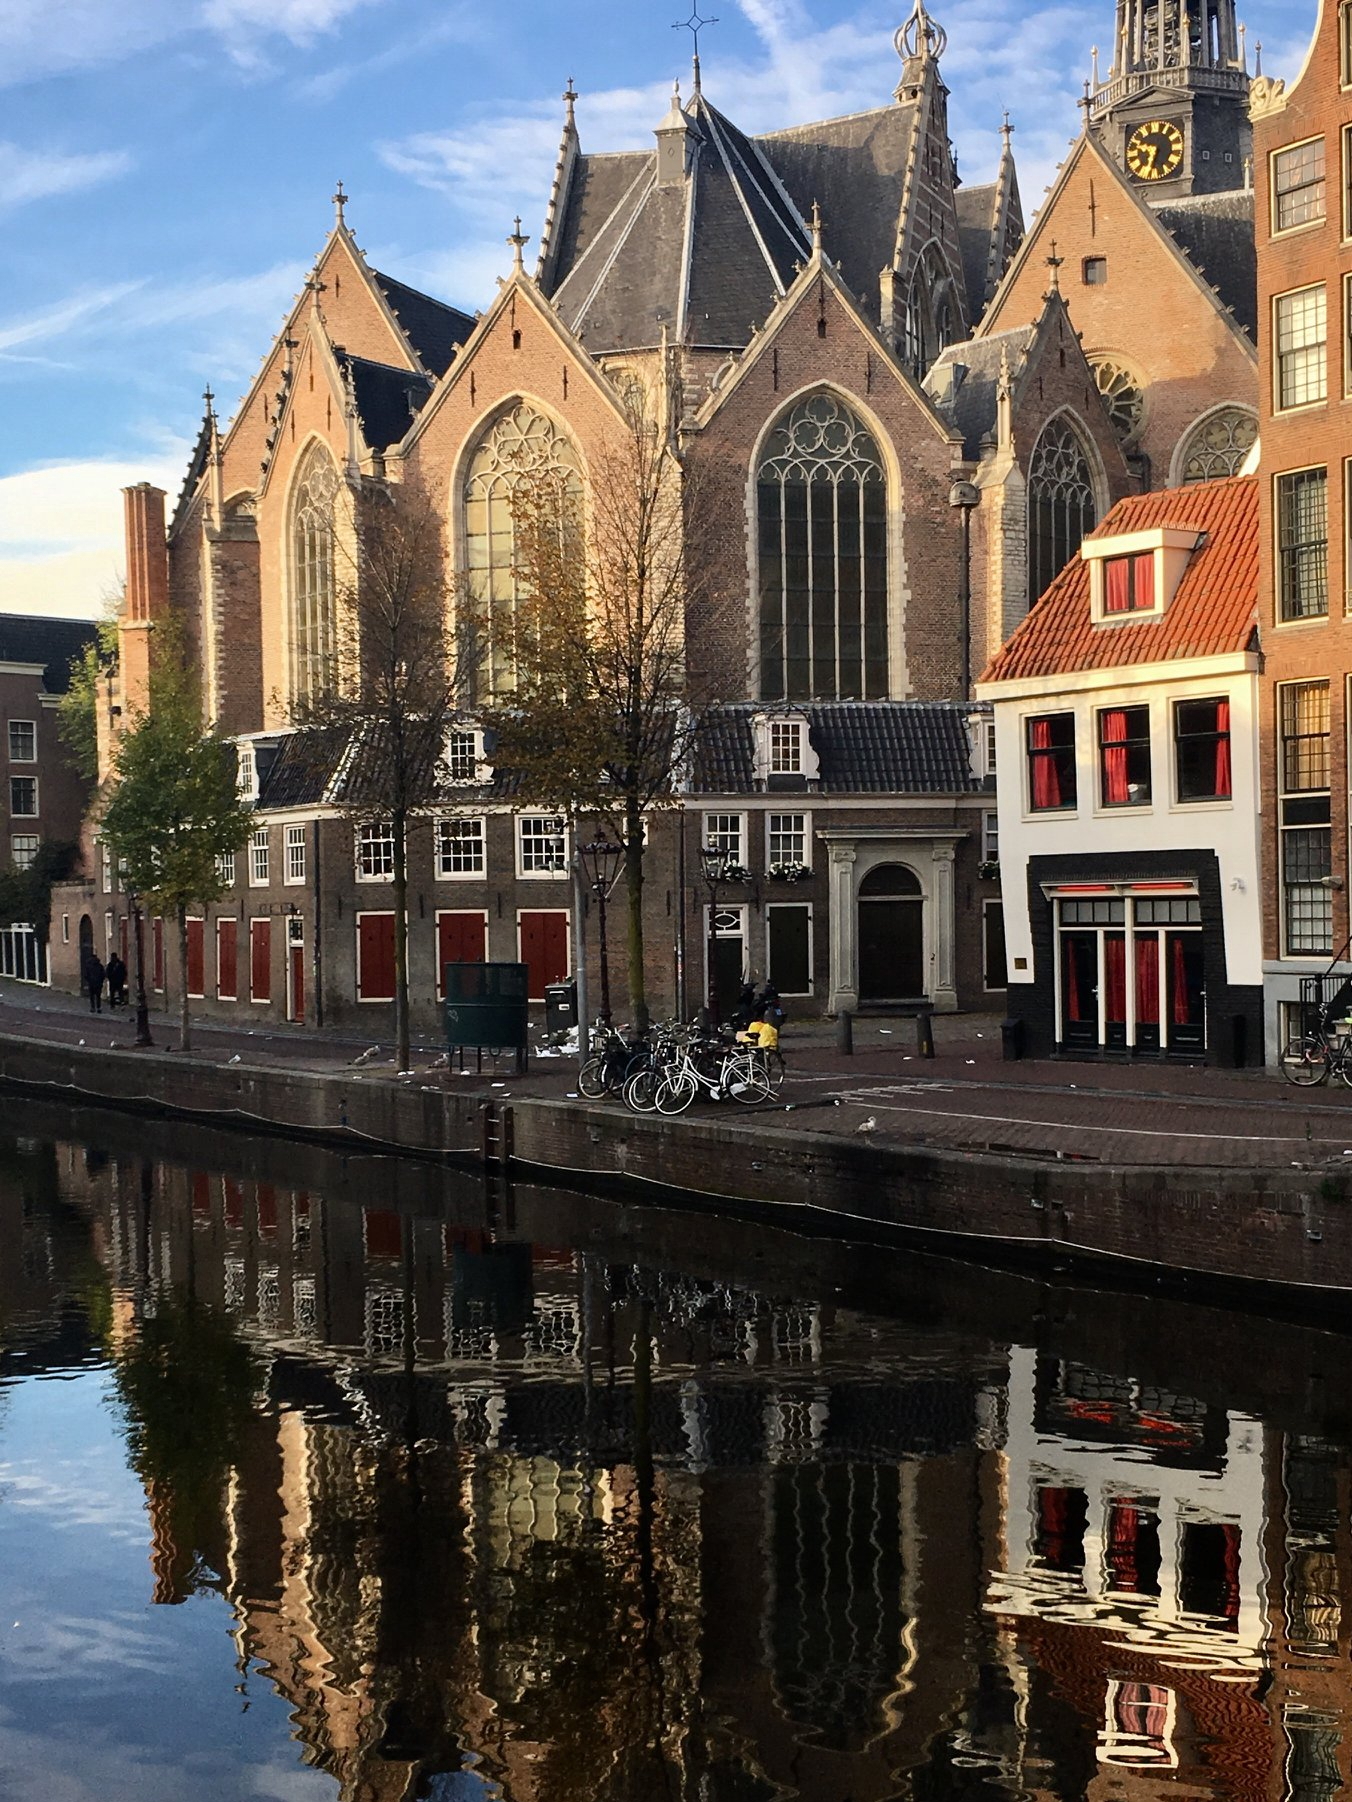 One of the things the Netherlands is famous for, the red light district. The photo is a view of the Oude Kerk, with some red light windows in front of it and the water reflections.